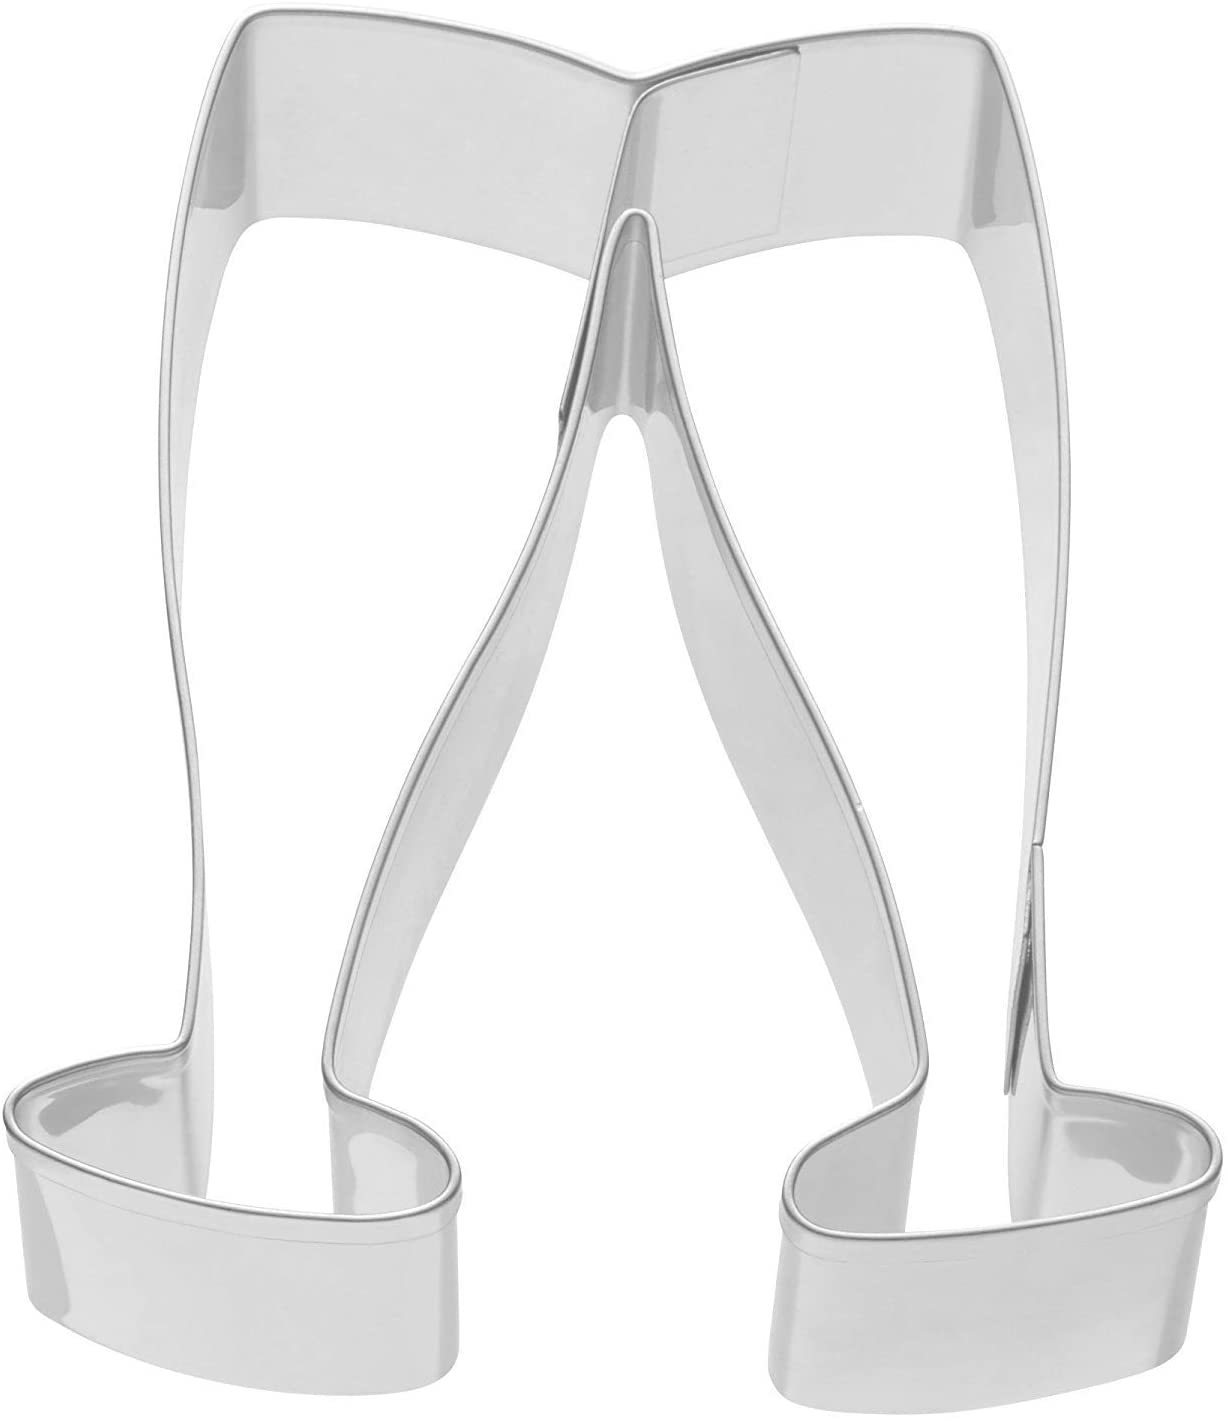 Kaiser Cookie Cutter Champagne Glasses Wedding Stainless Steel Cookie Cutter for Biscuits 8 x 7 x 2.5 cm